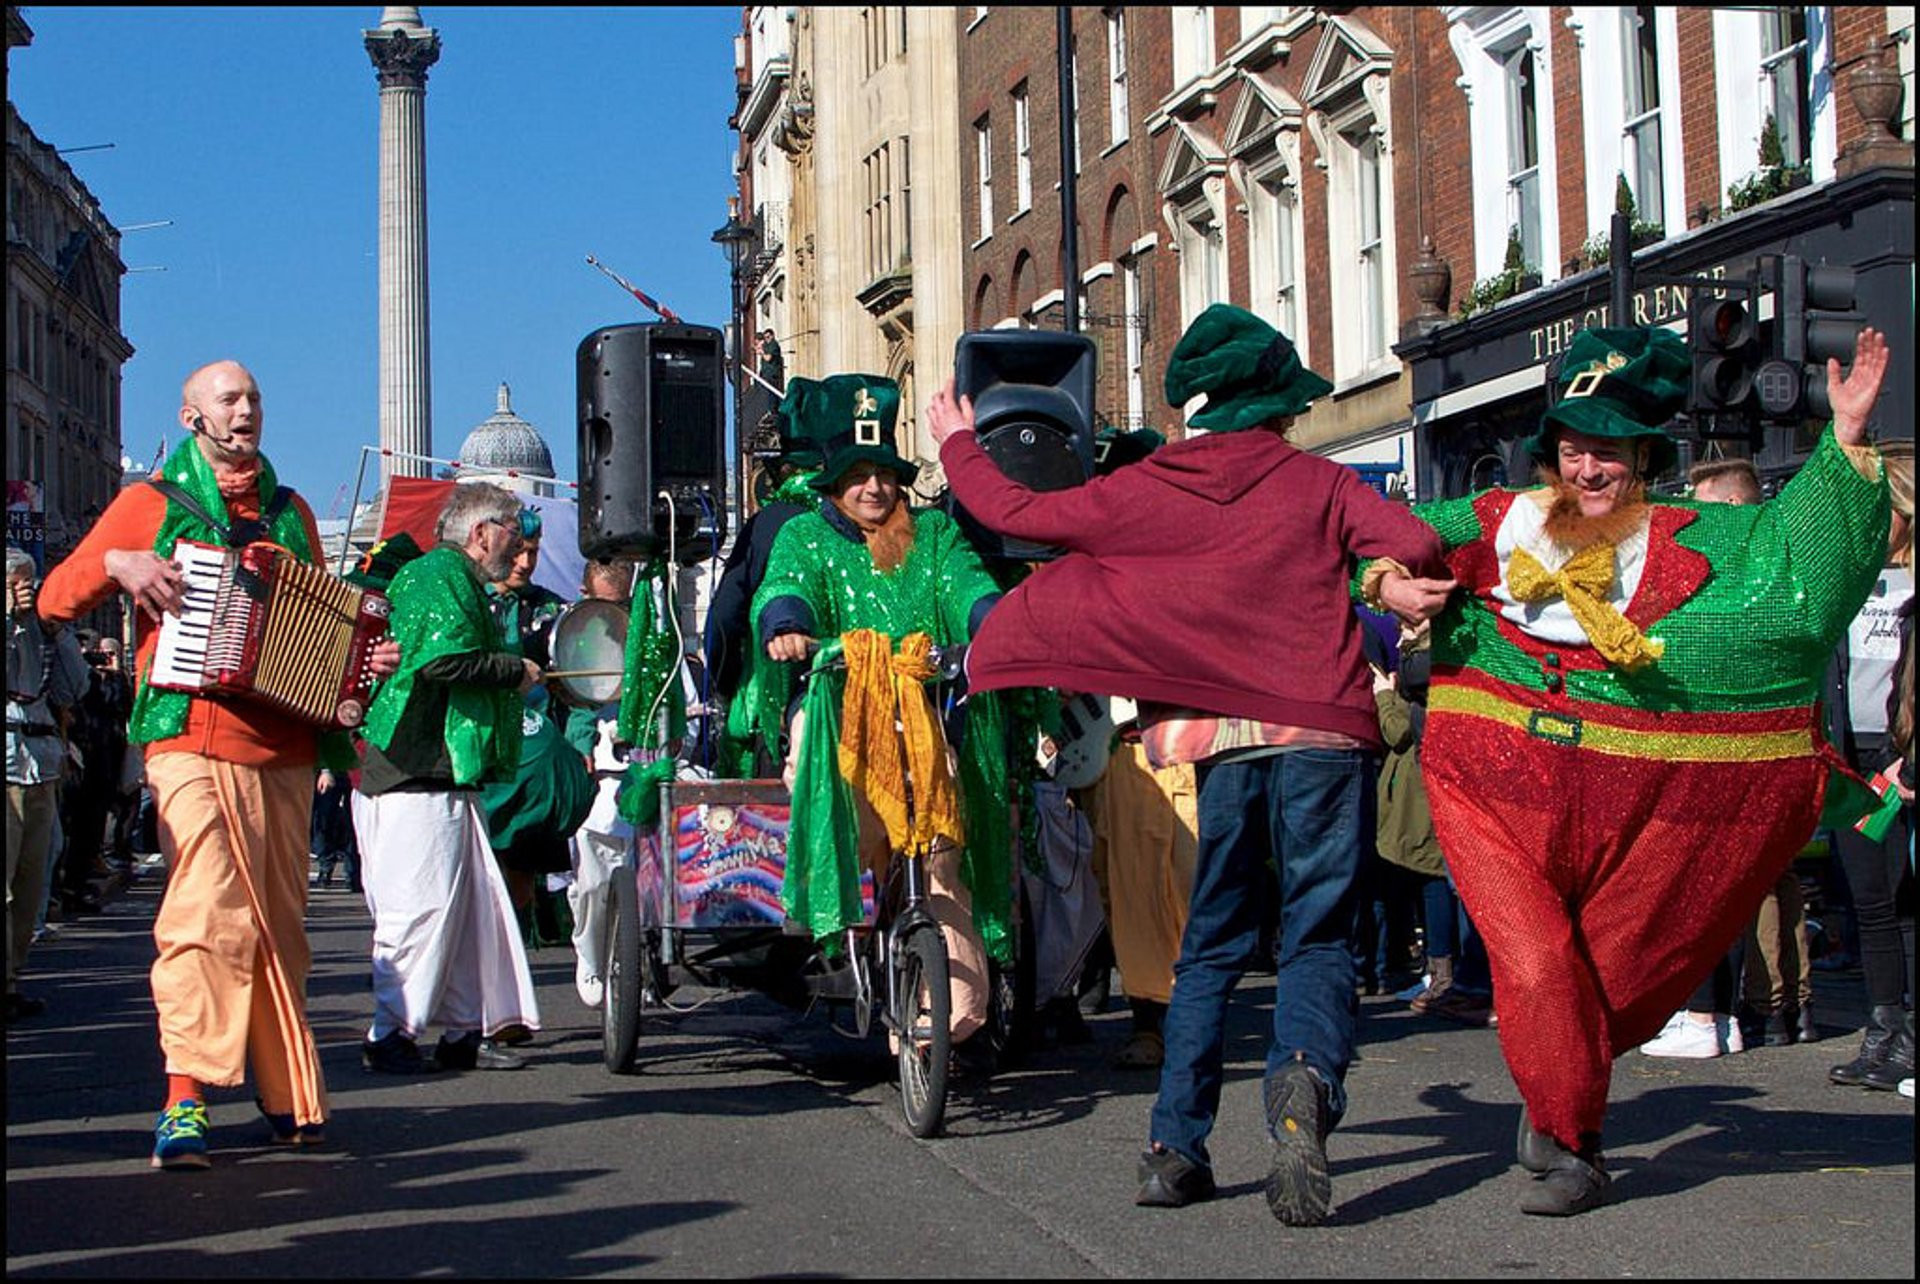 St Patrick's Day Activities Near Me
 St Patrick s Day Parade 2020 in London Dates & Map